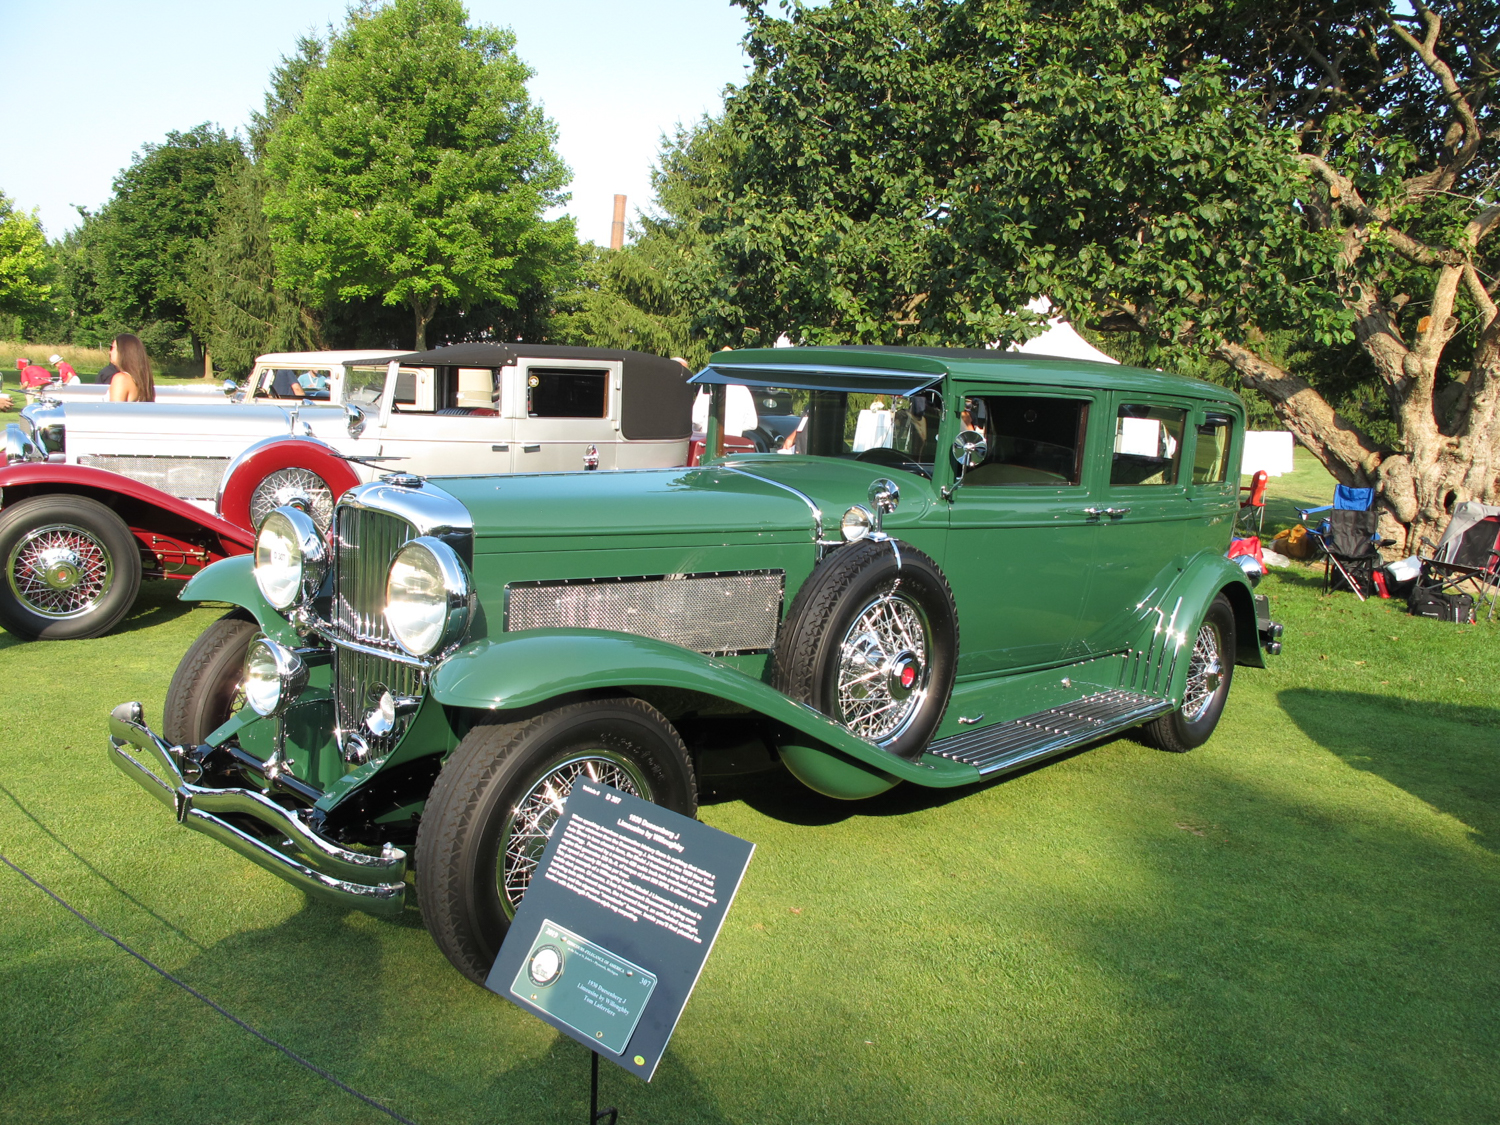 1930 Duesie J Limousine by Willoughby of Tom Laferriere.